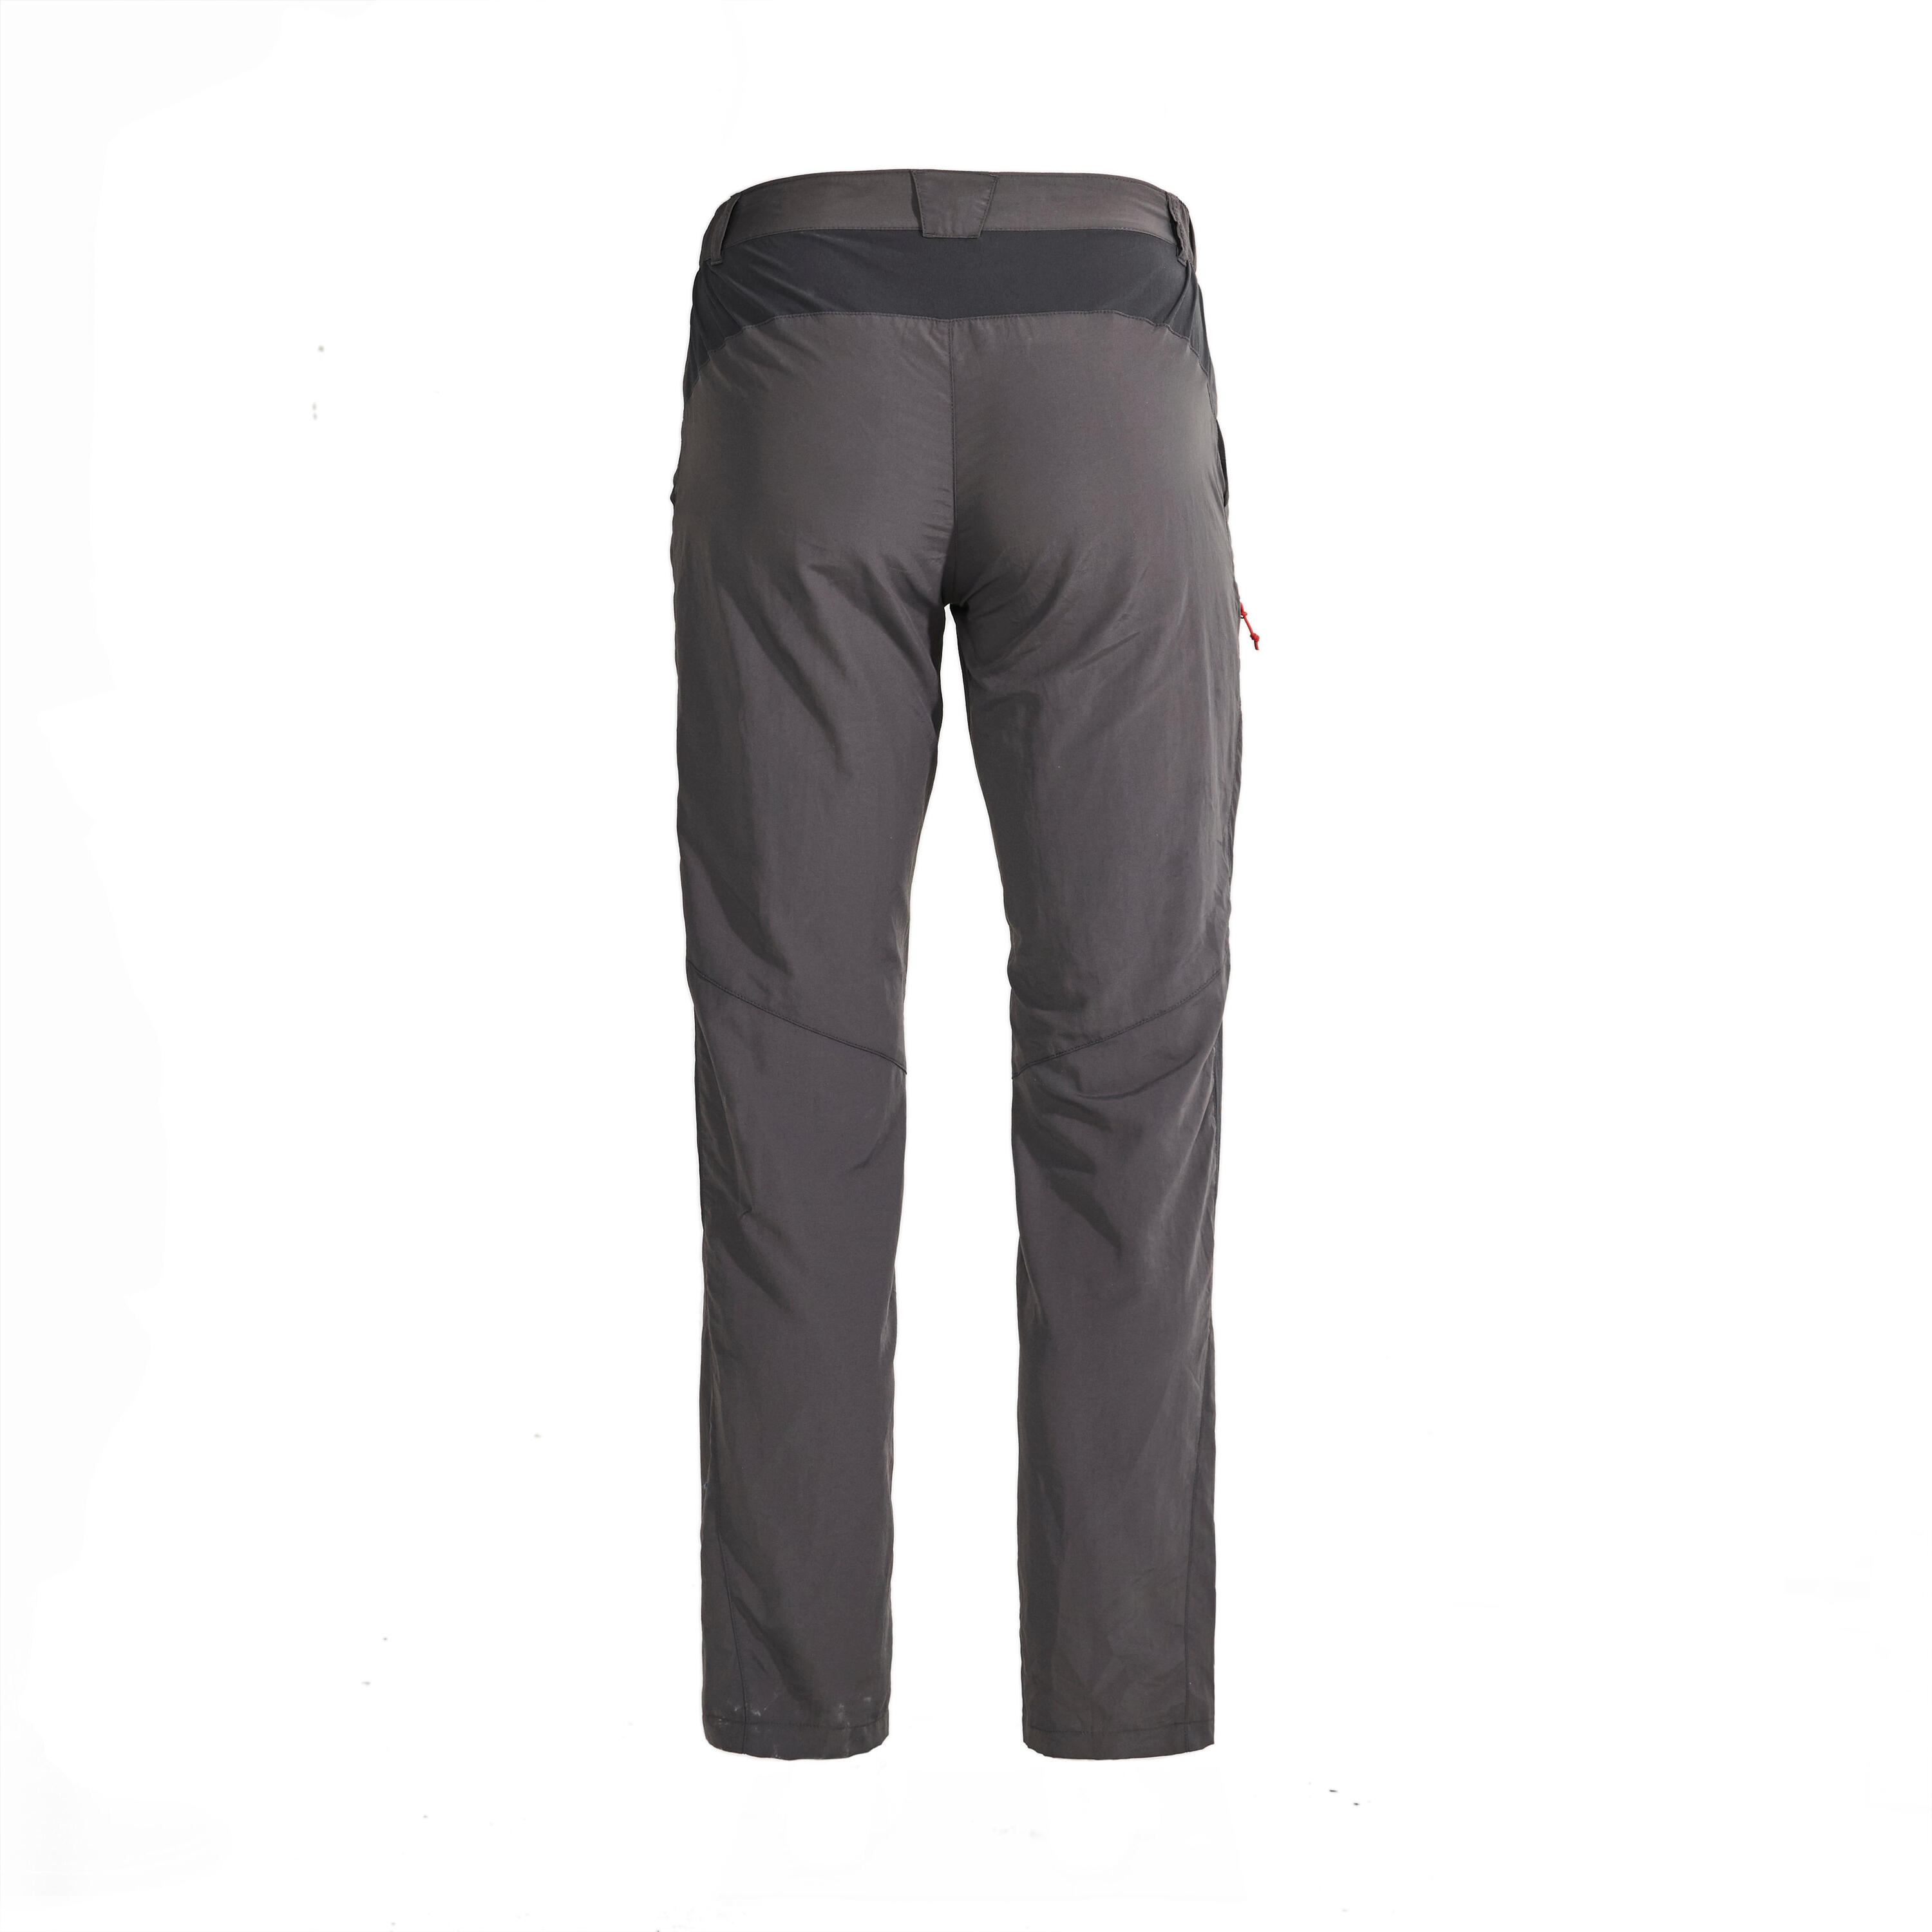 Men's Hiking Trousers - MH100 8/10